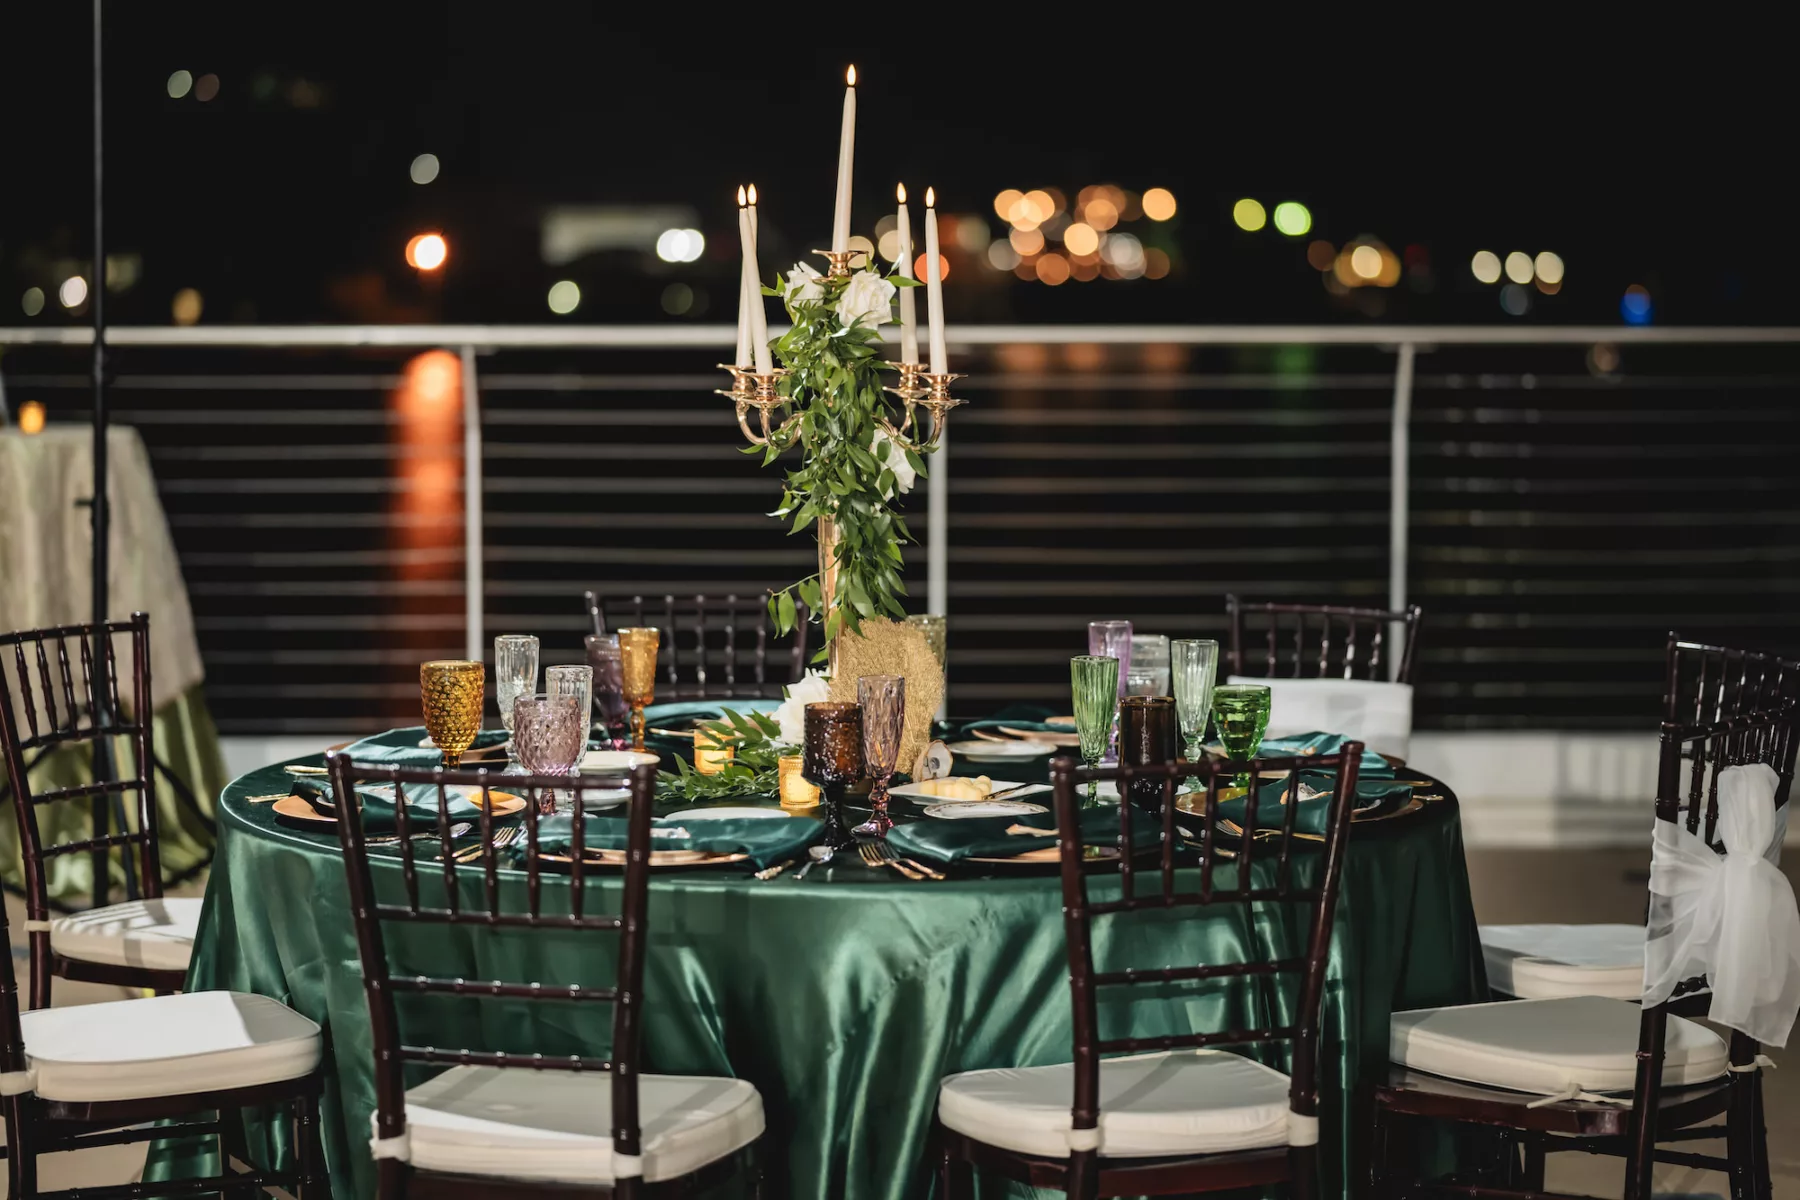 Rooftop Terrace Nautical Emerald Green Wedding Reception Inspiration | Mahogany Chiavari Chairs | Gold Candelabra with White Roses and Greenery | Tampa Bay Outside The Box Event Rentals | Florist Lemon Drops